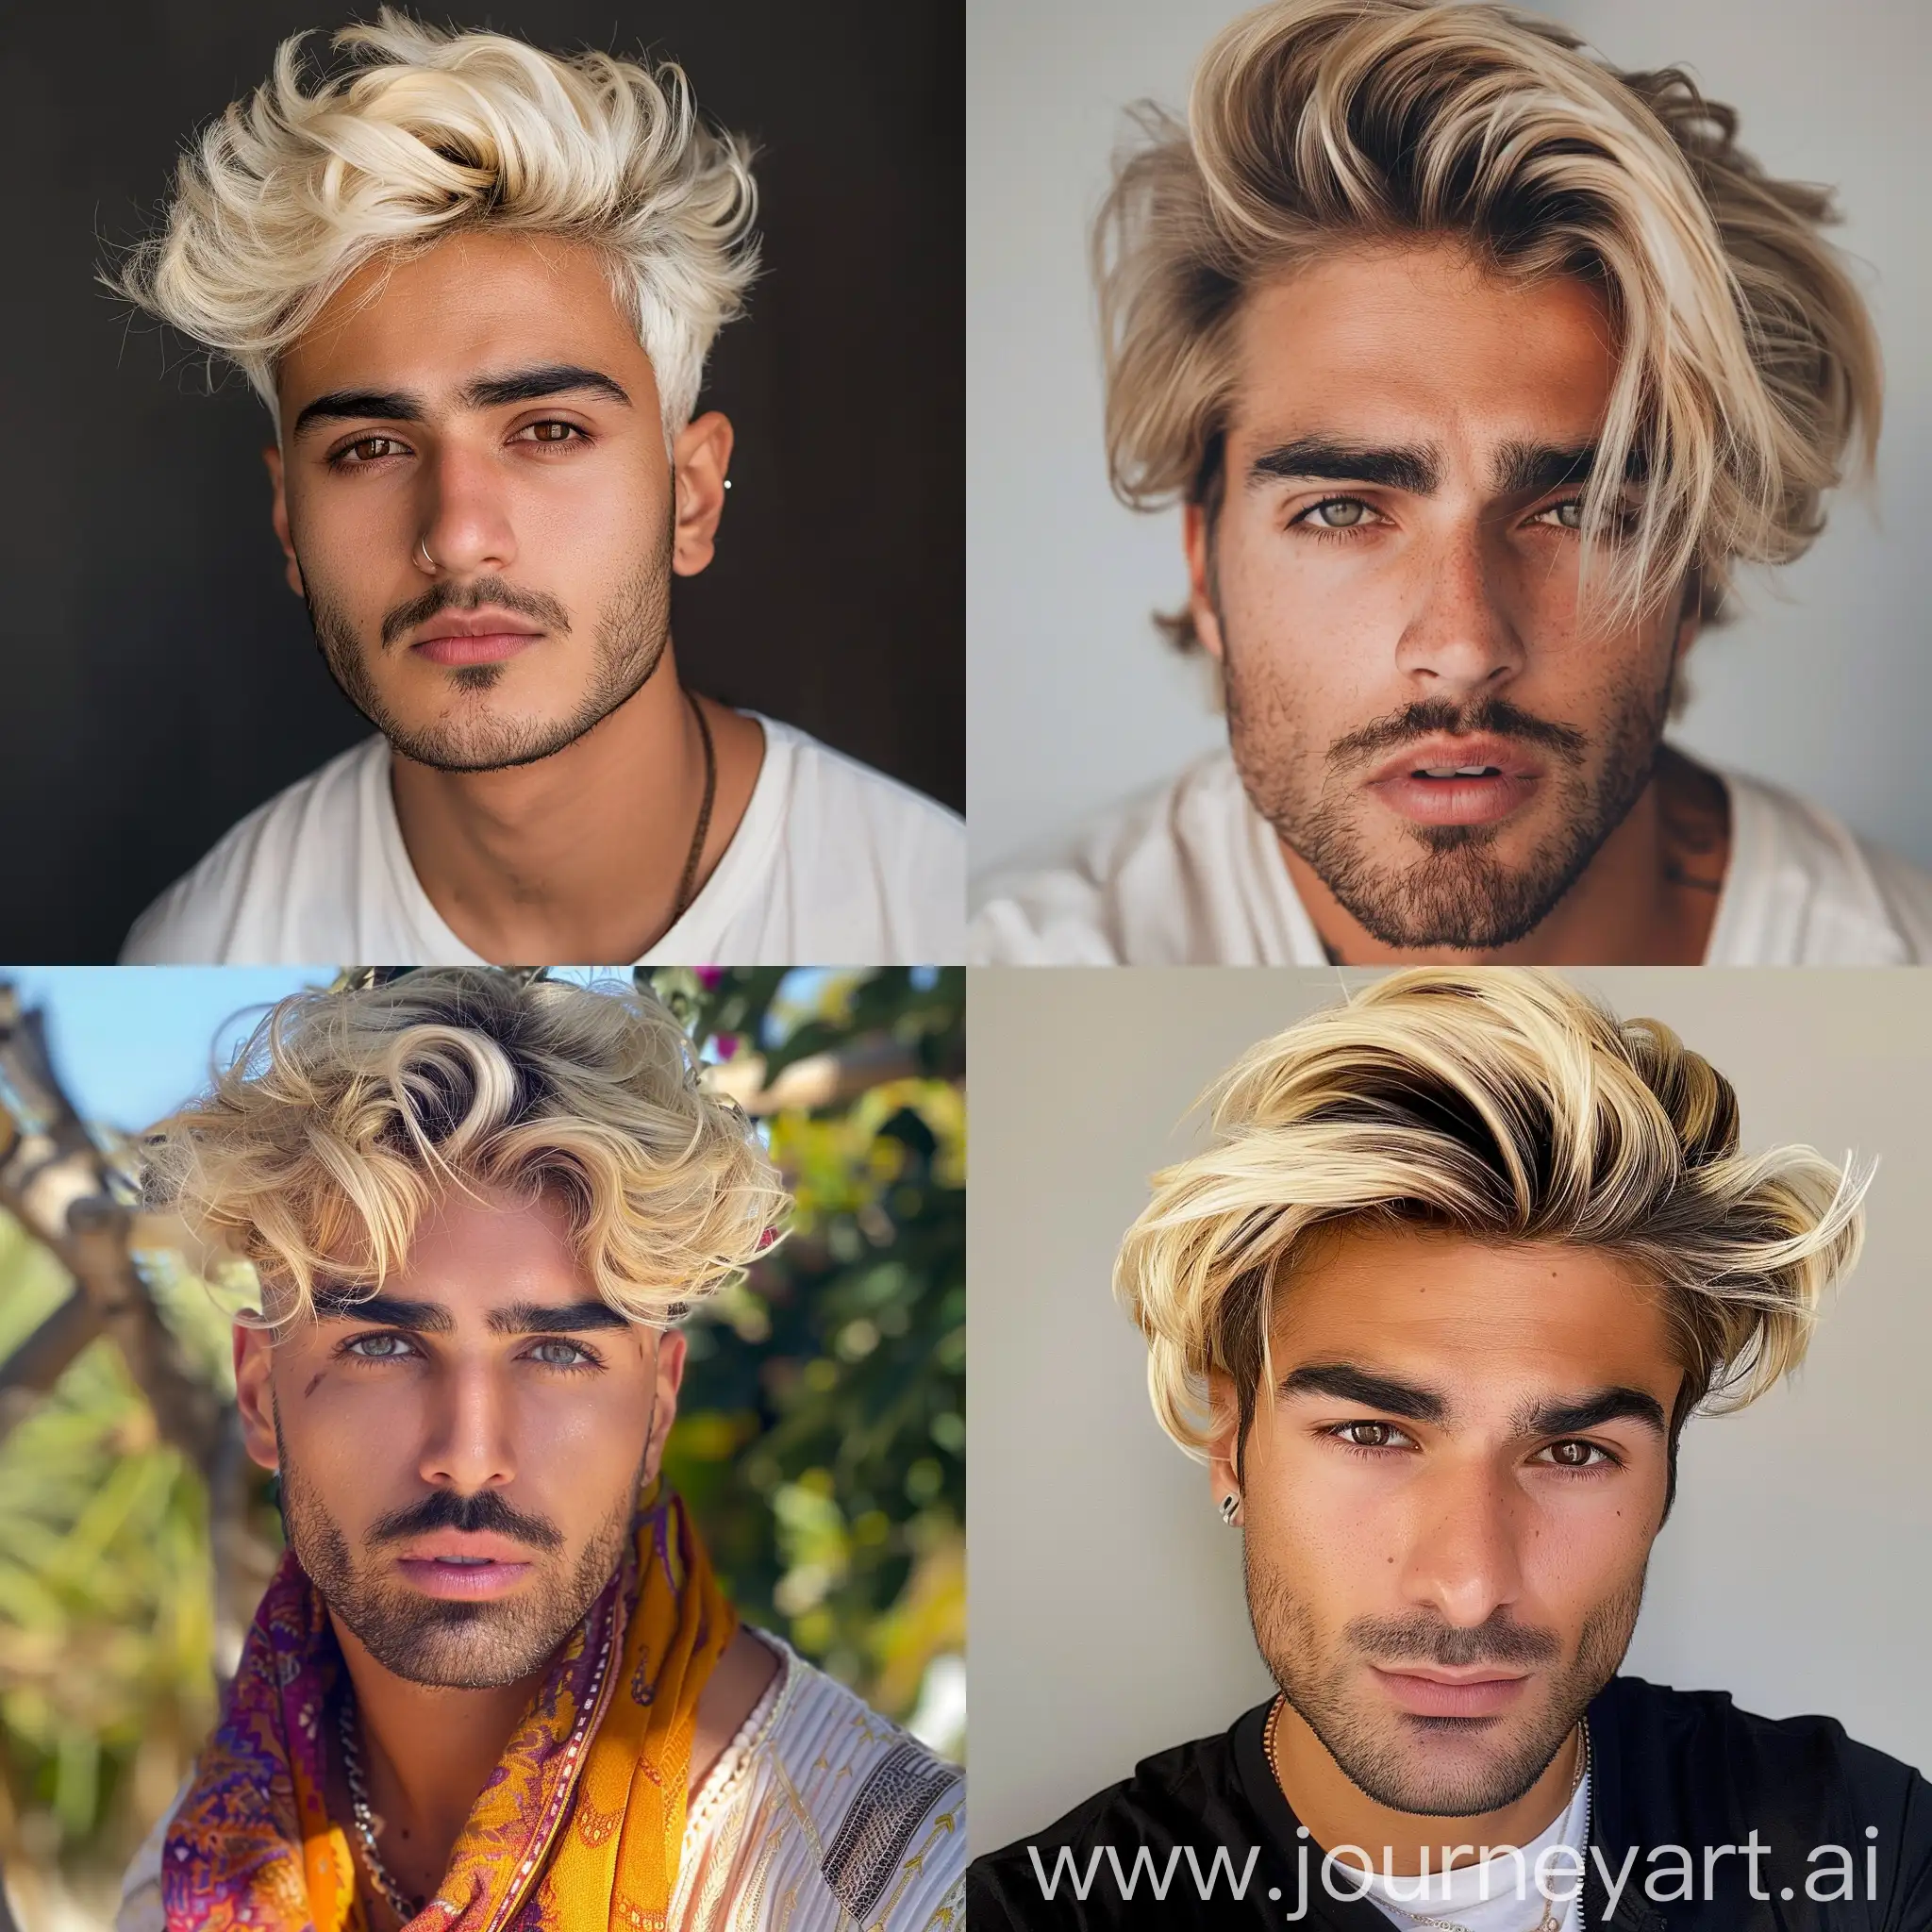 Persian man with blonde hair